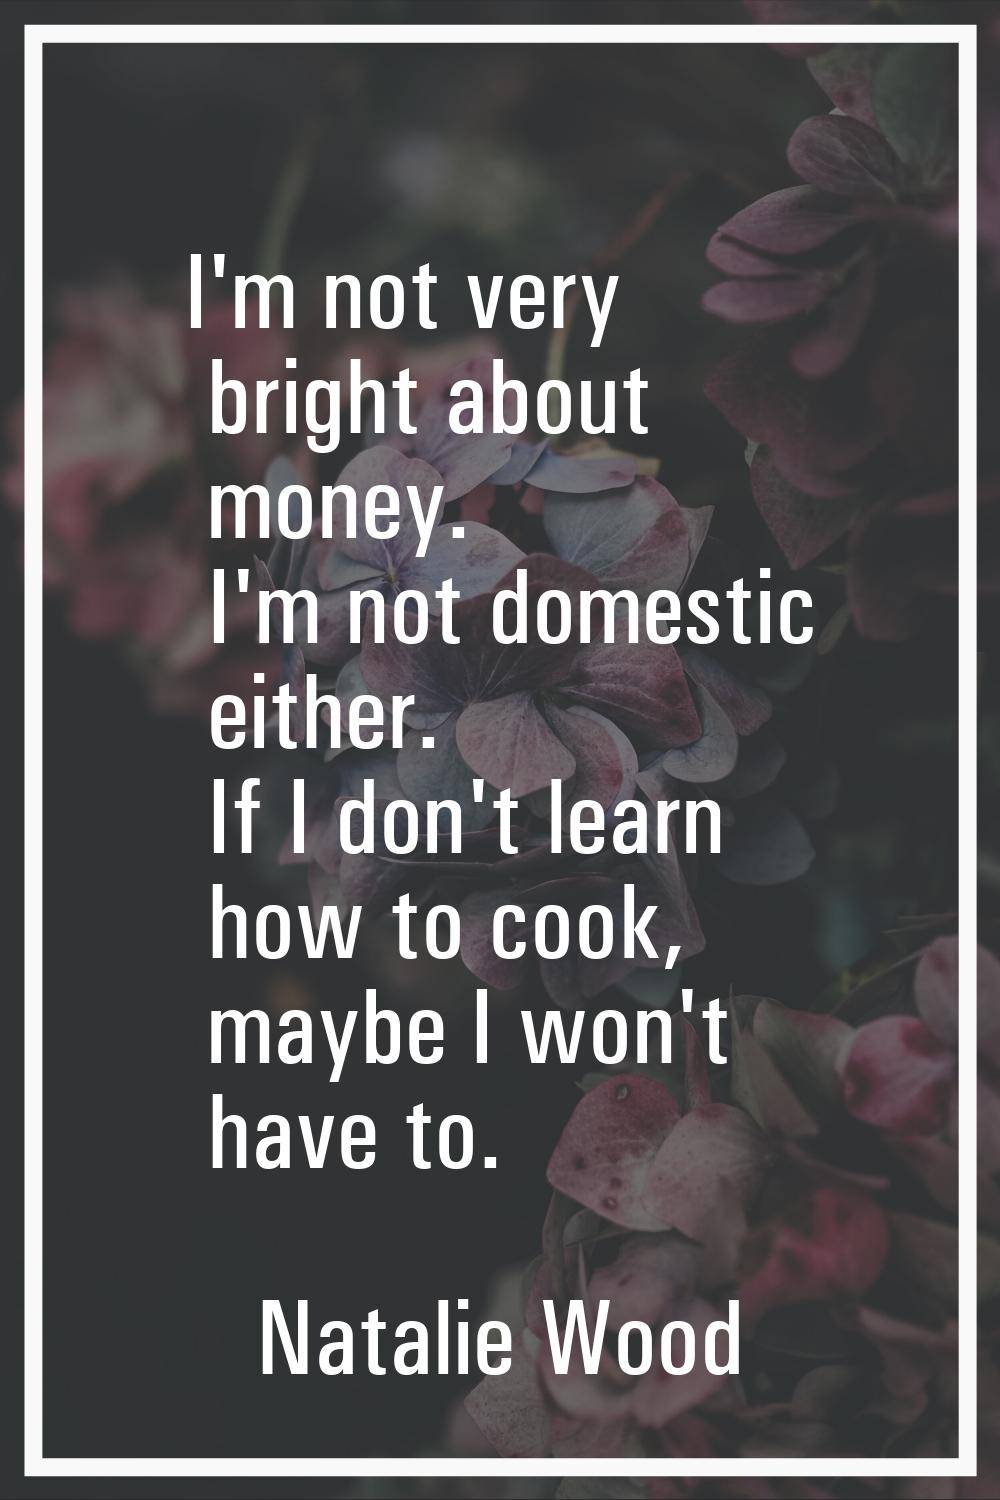 I'm not very bright about money. I'm not domestic either. If I don't learn how to cook, maybe I won